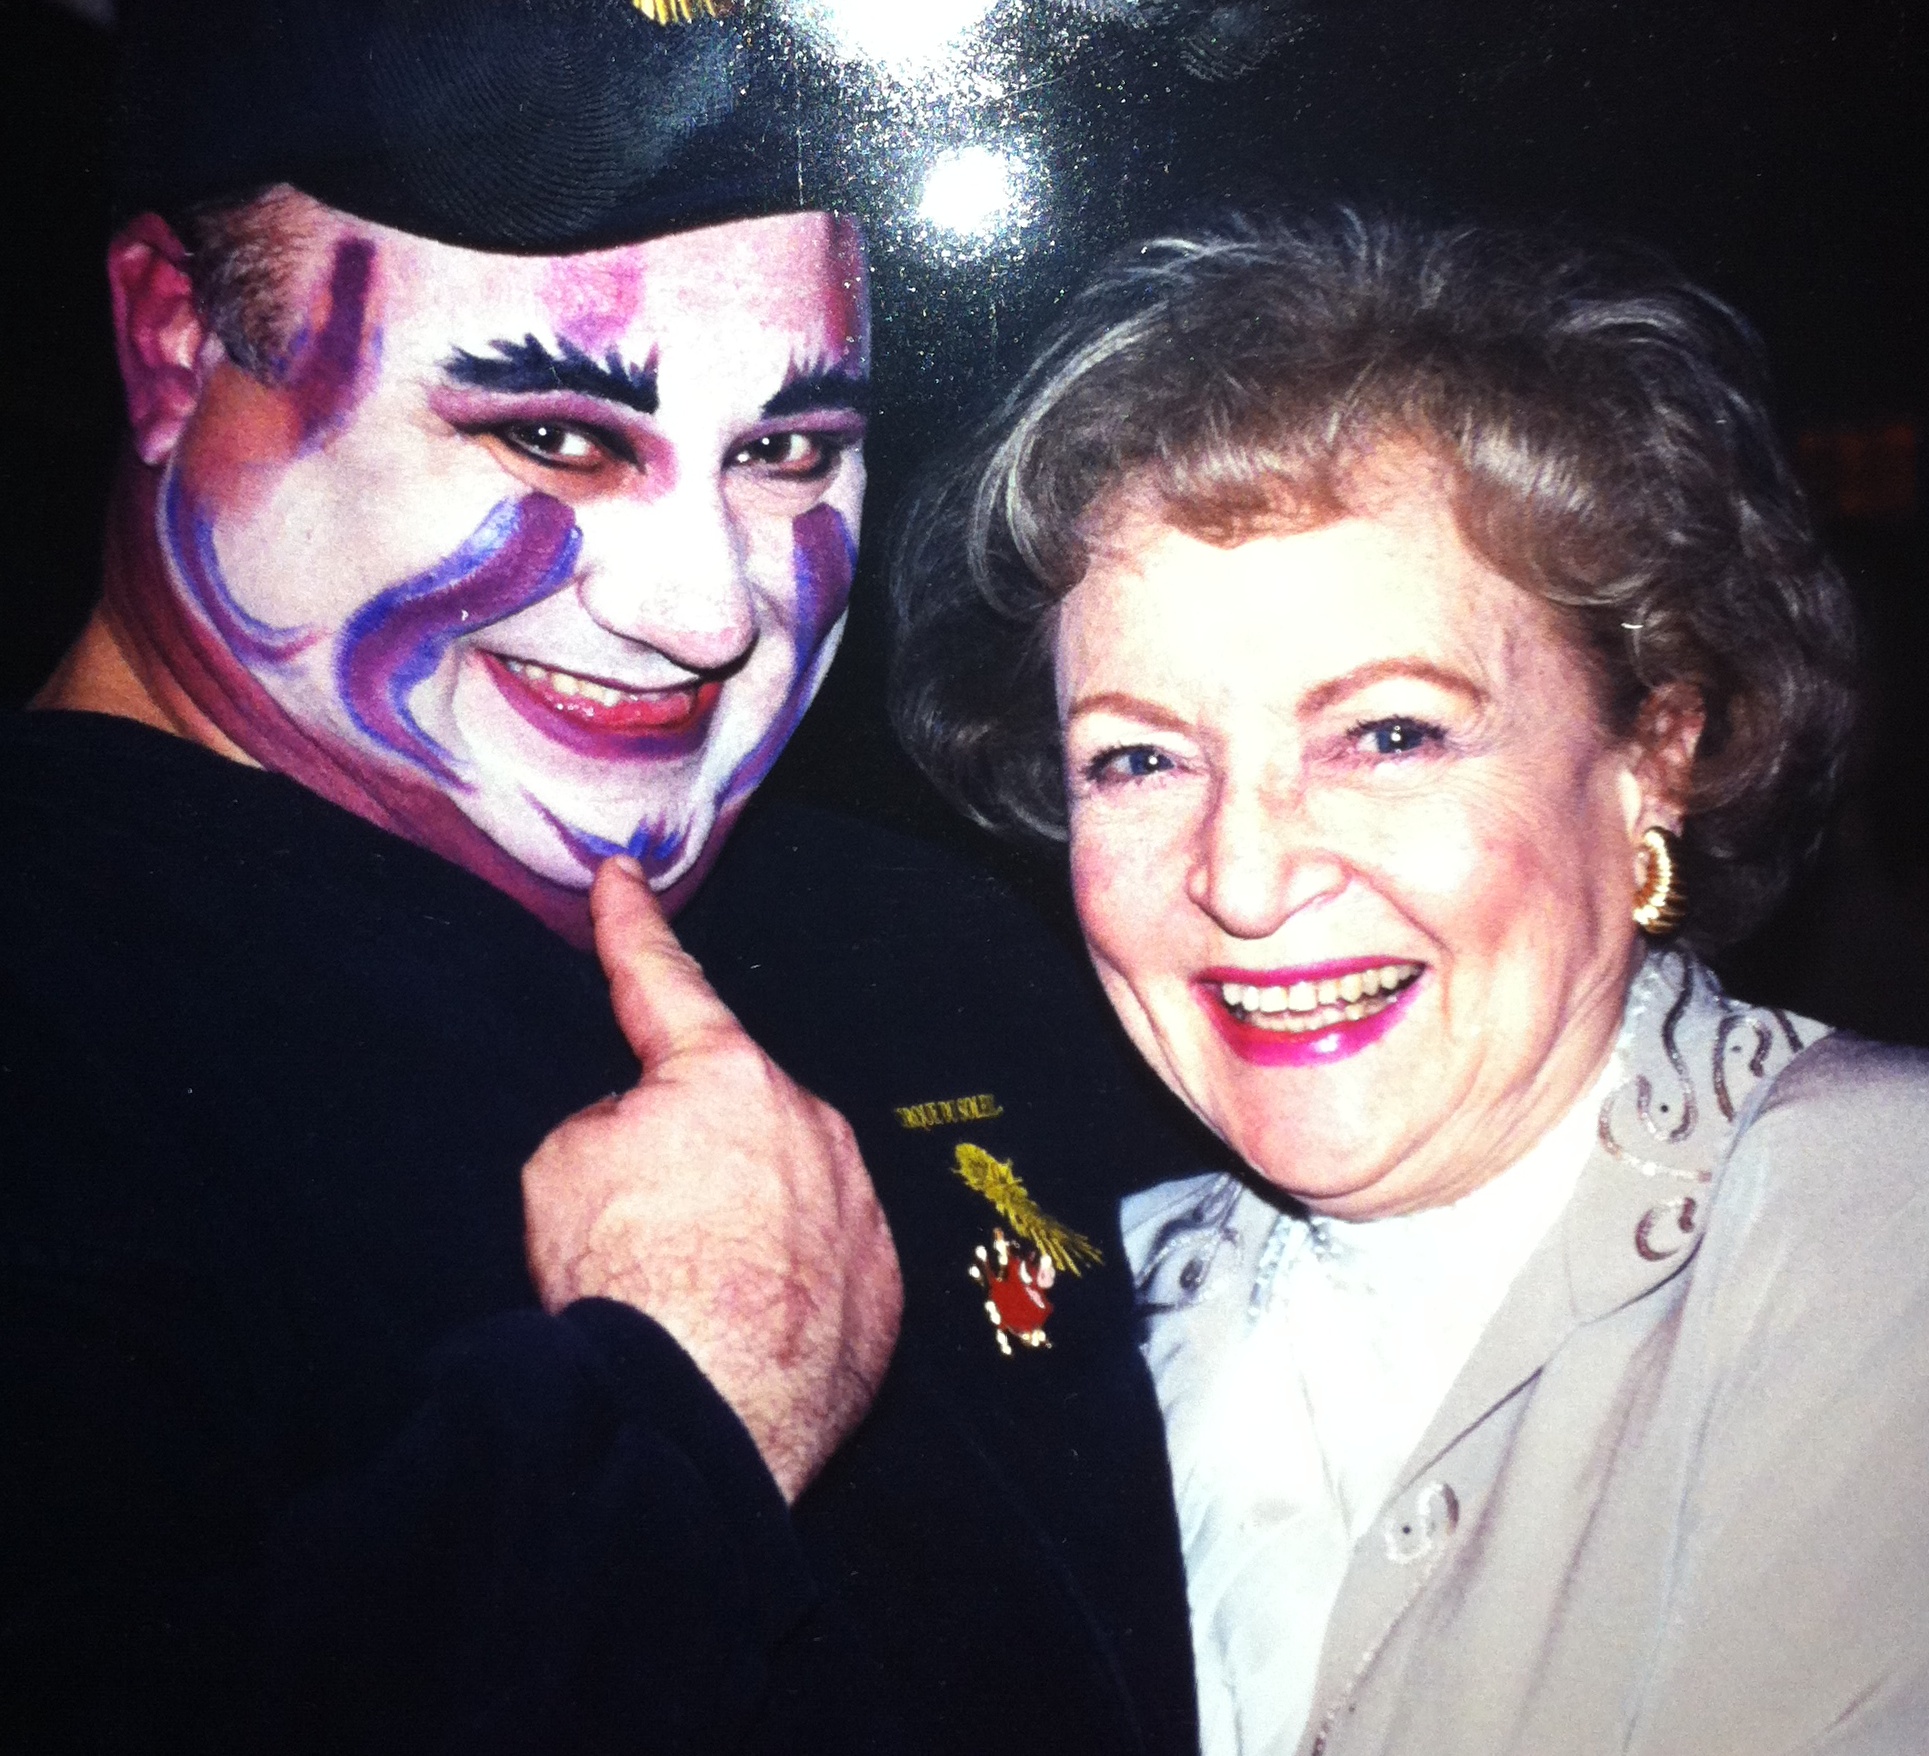 Backstage of The Lion King with Betty White